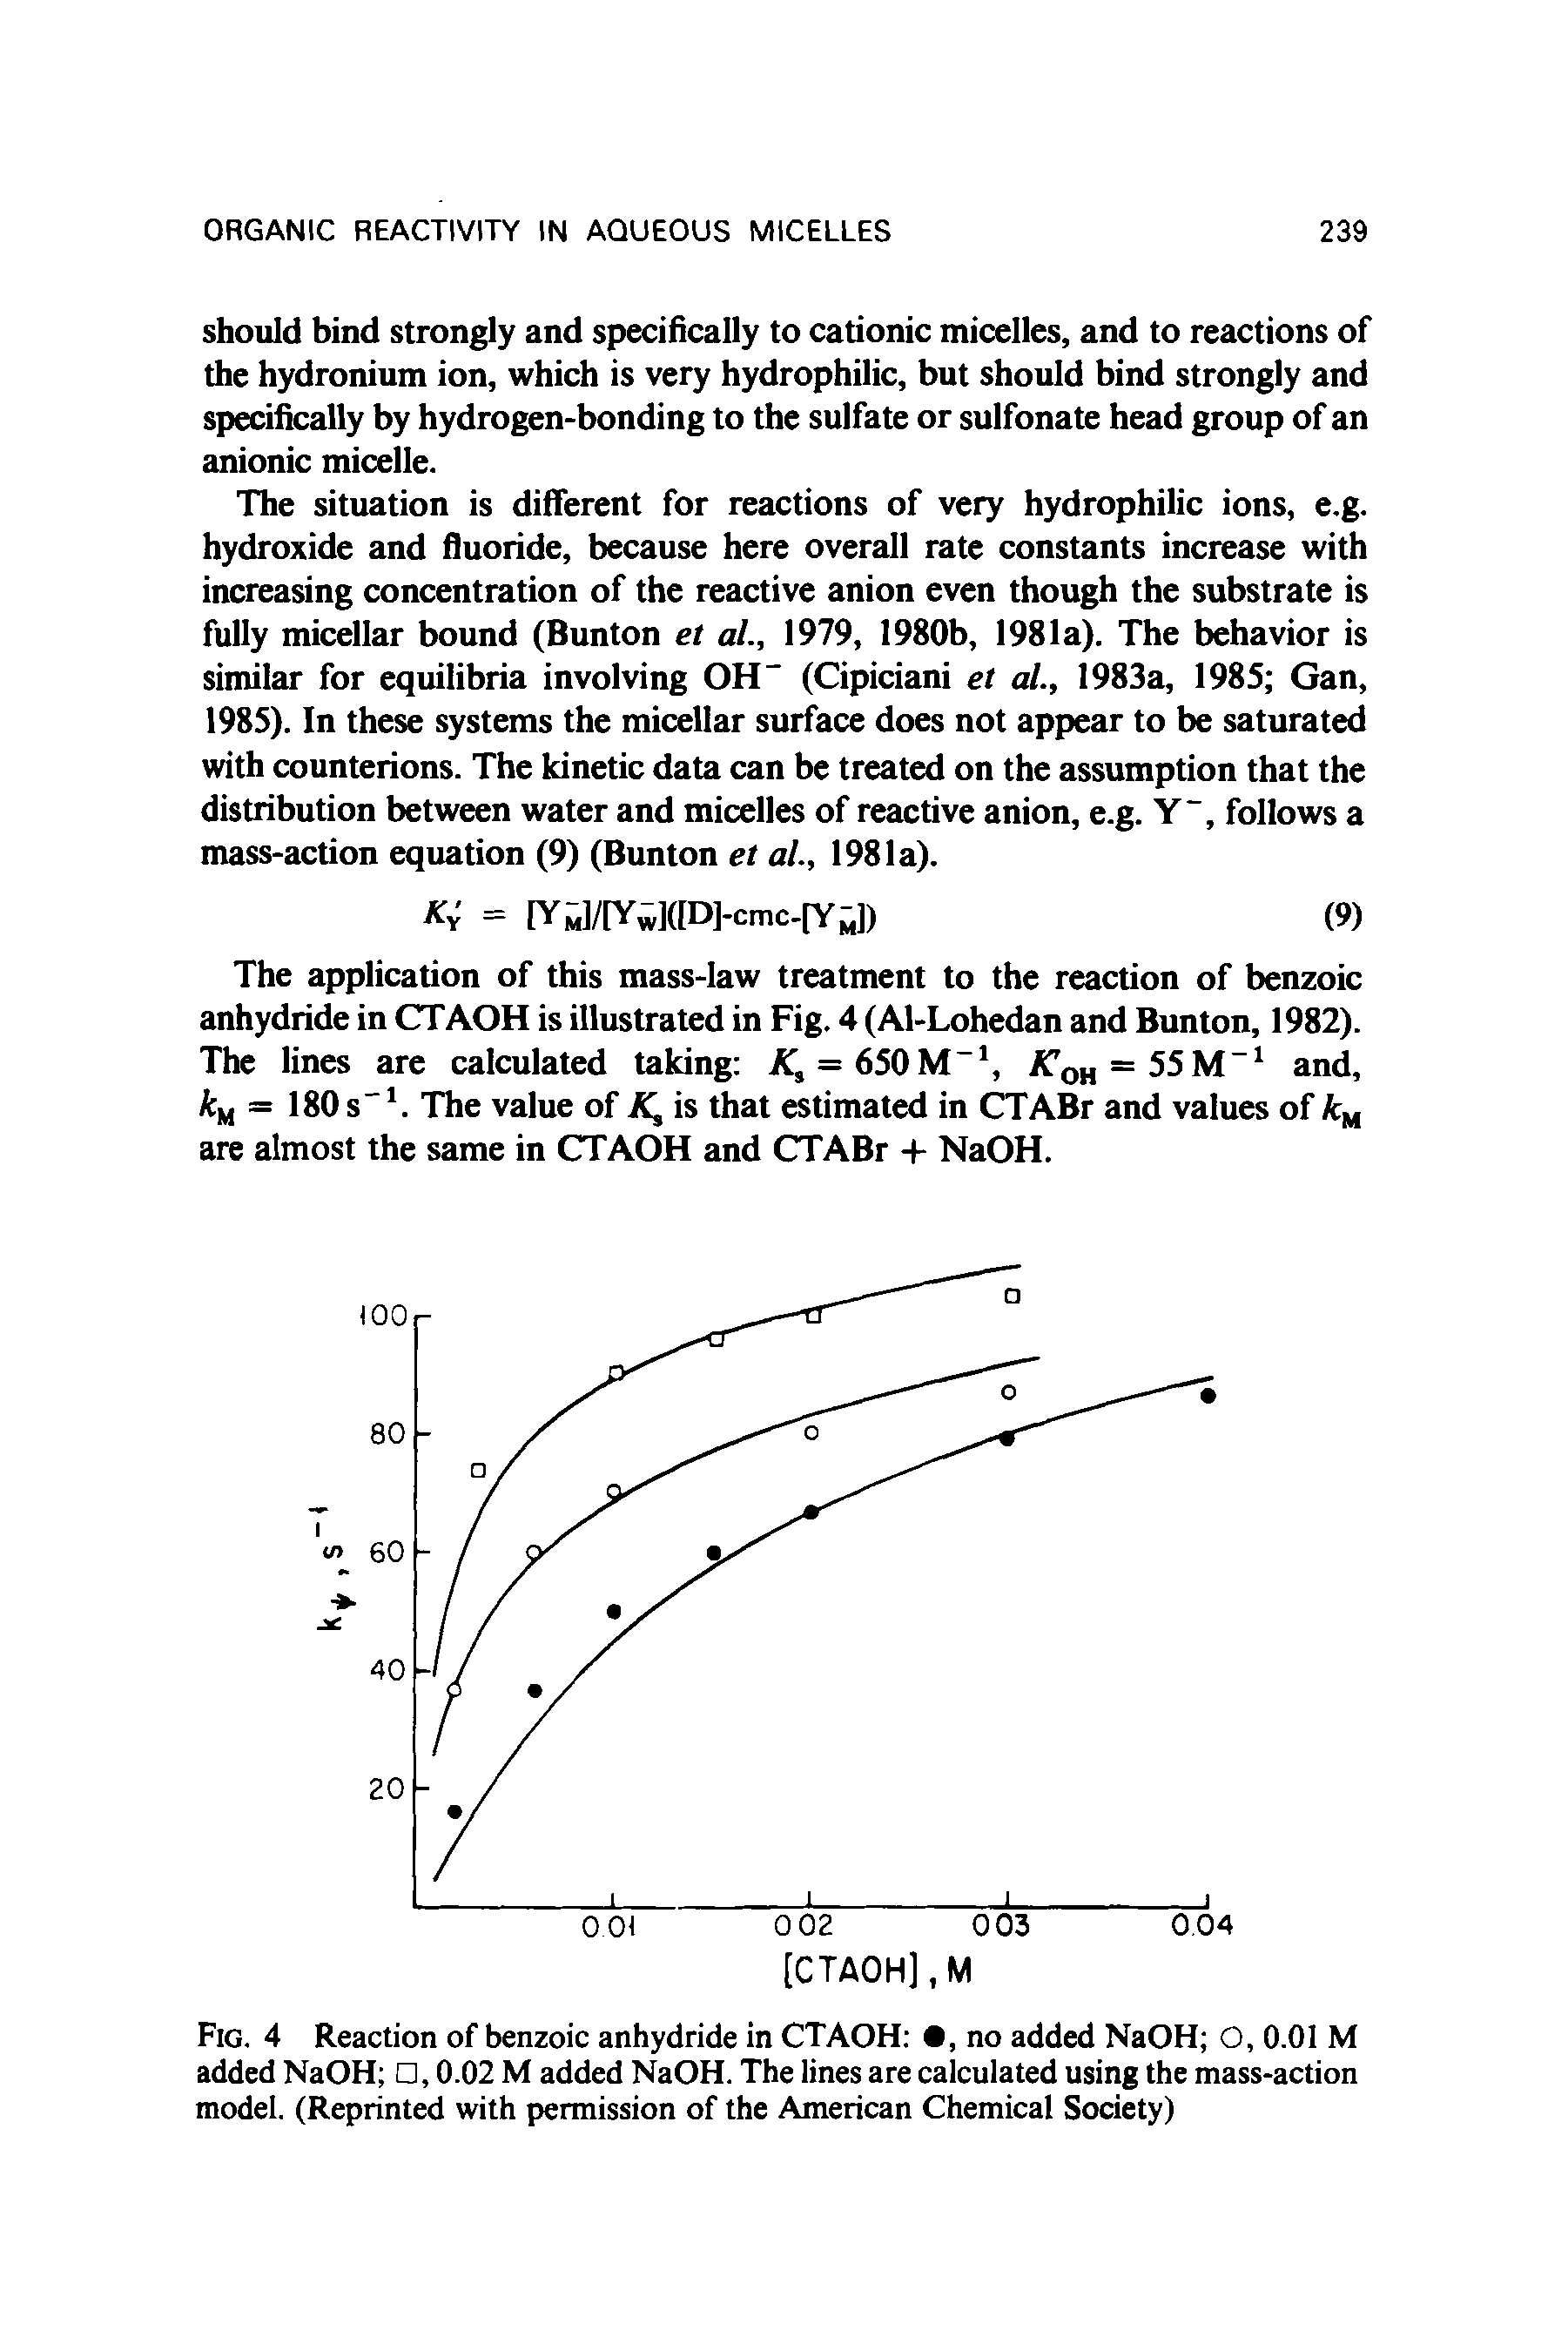 Fig. 4 Reaction of benzoic anhydride in CTAOH , no added NaOH O, 0.01 M added NaOH , 0.02 M added NaOH. The lines are calculated using the mass-action model. (Reprinted with permission of the American Chemical Society)...